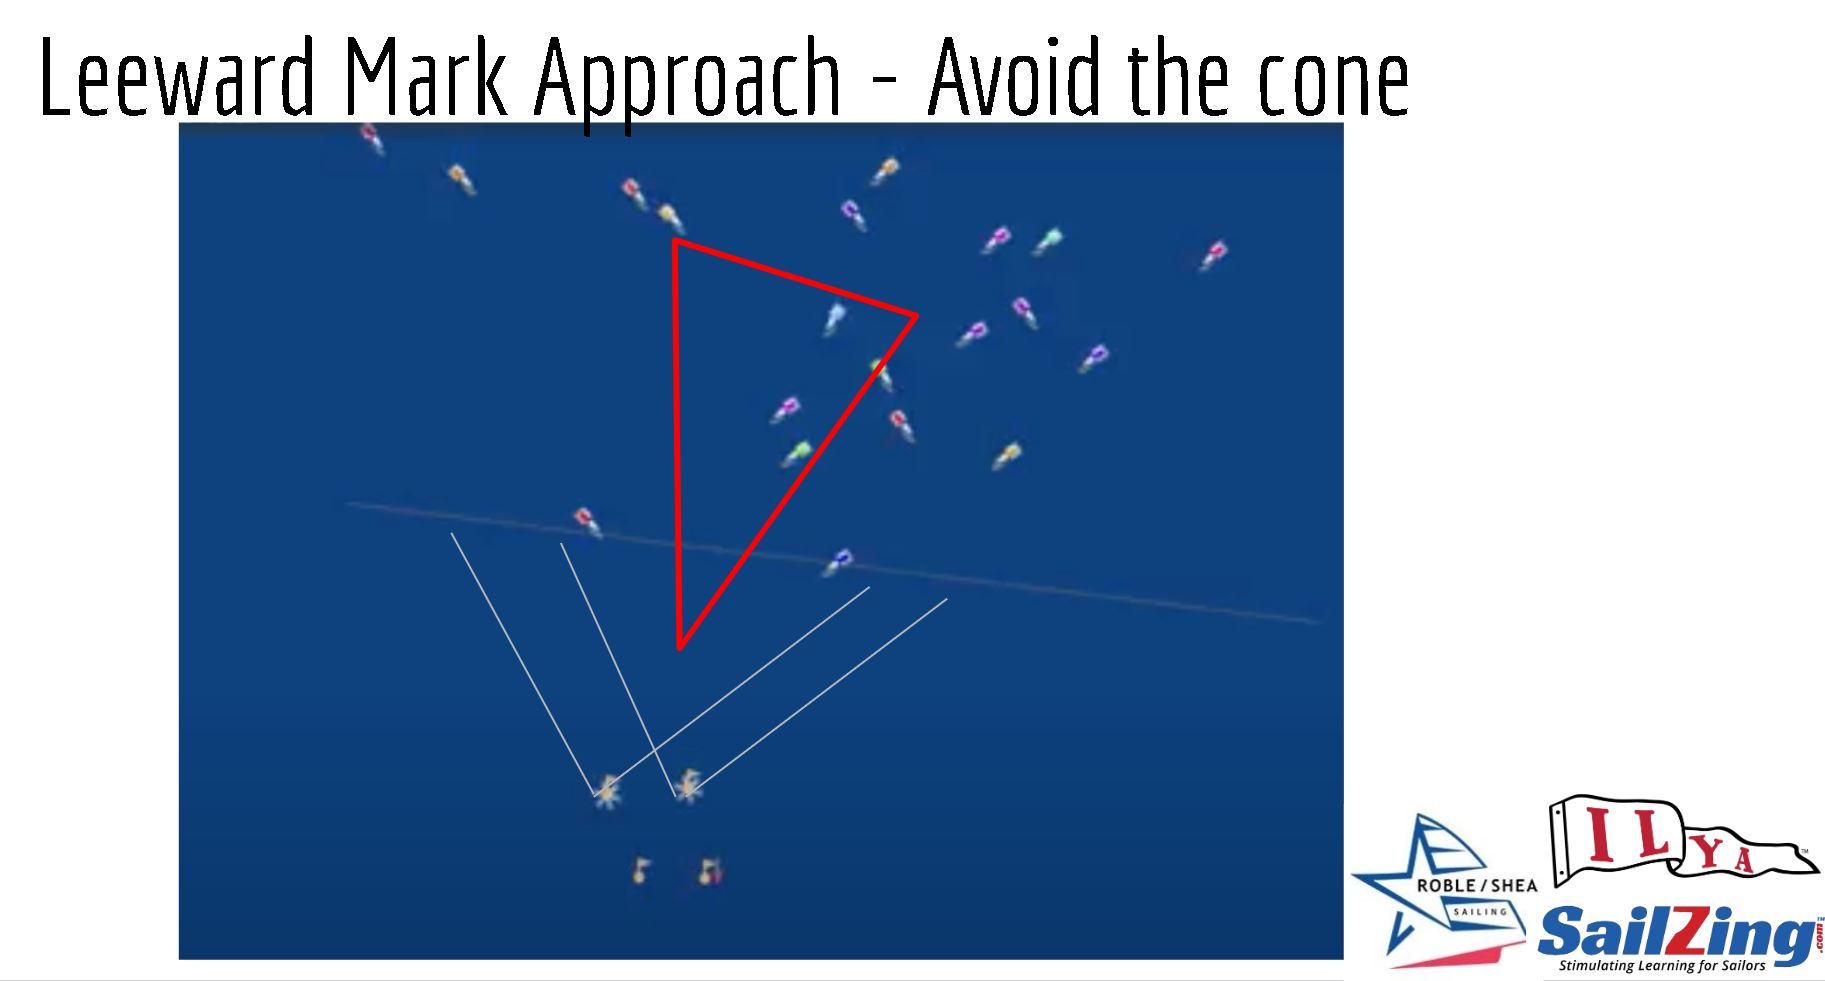 downwind tactics - avoid the cone